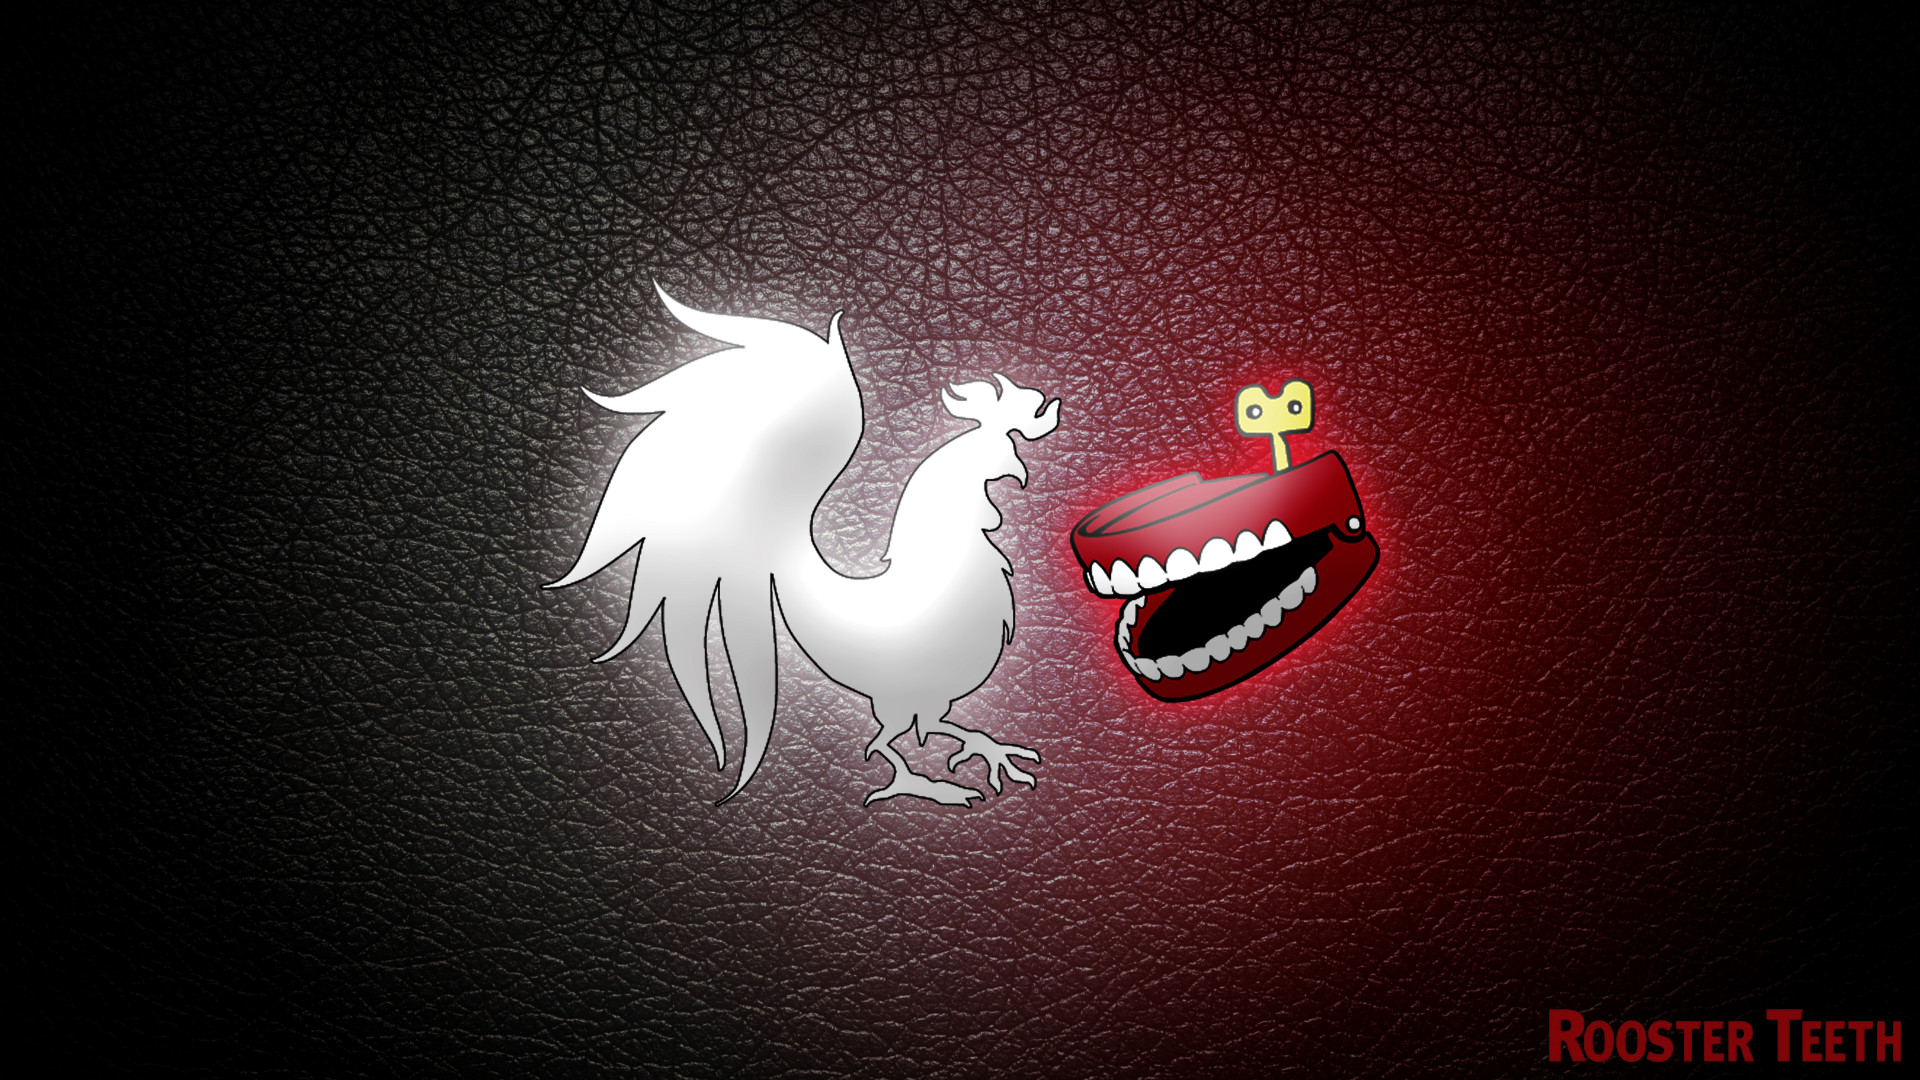 1920x1080 ... Rooster Teeth Wallpaper by guardians-of-hi